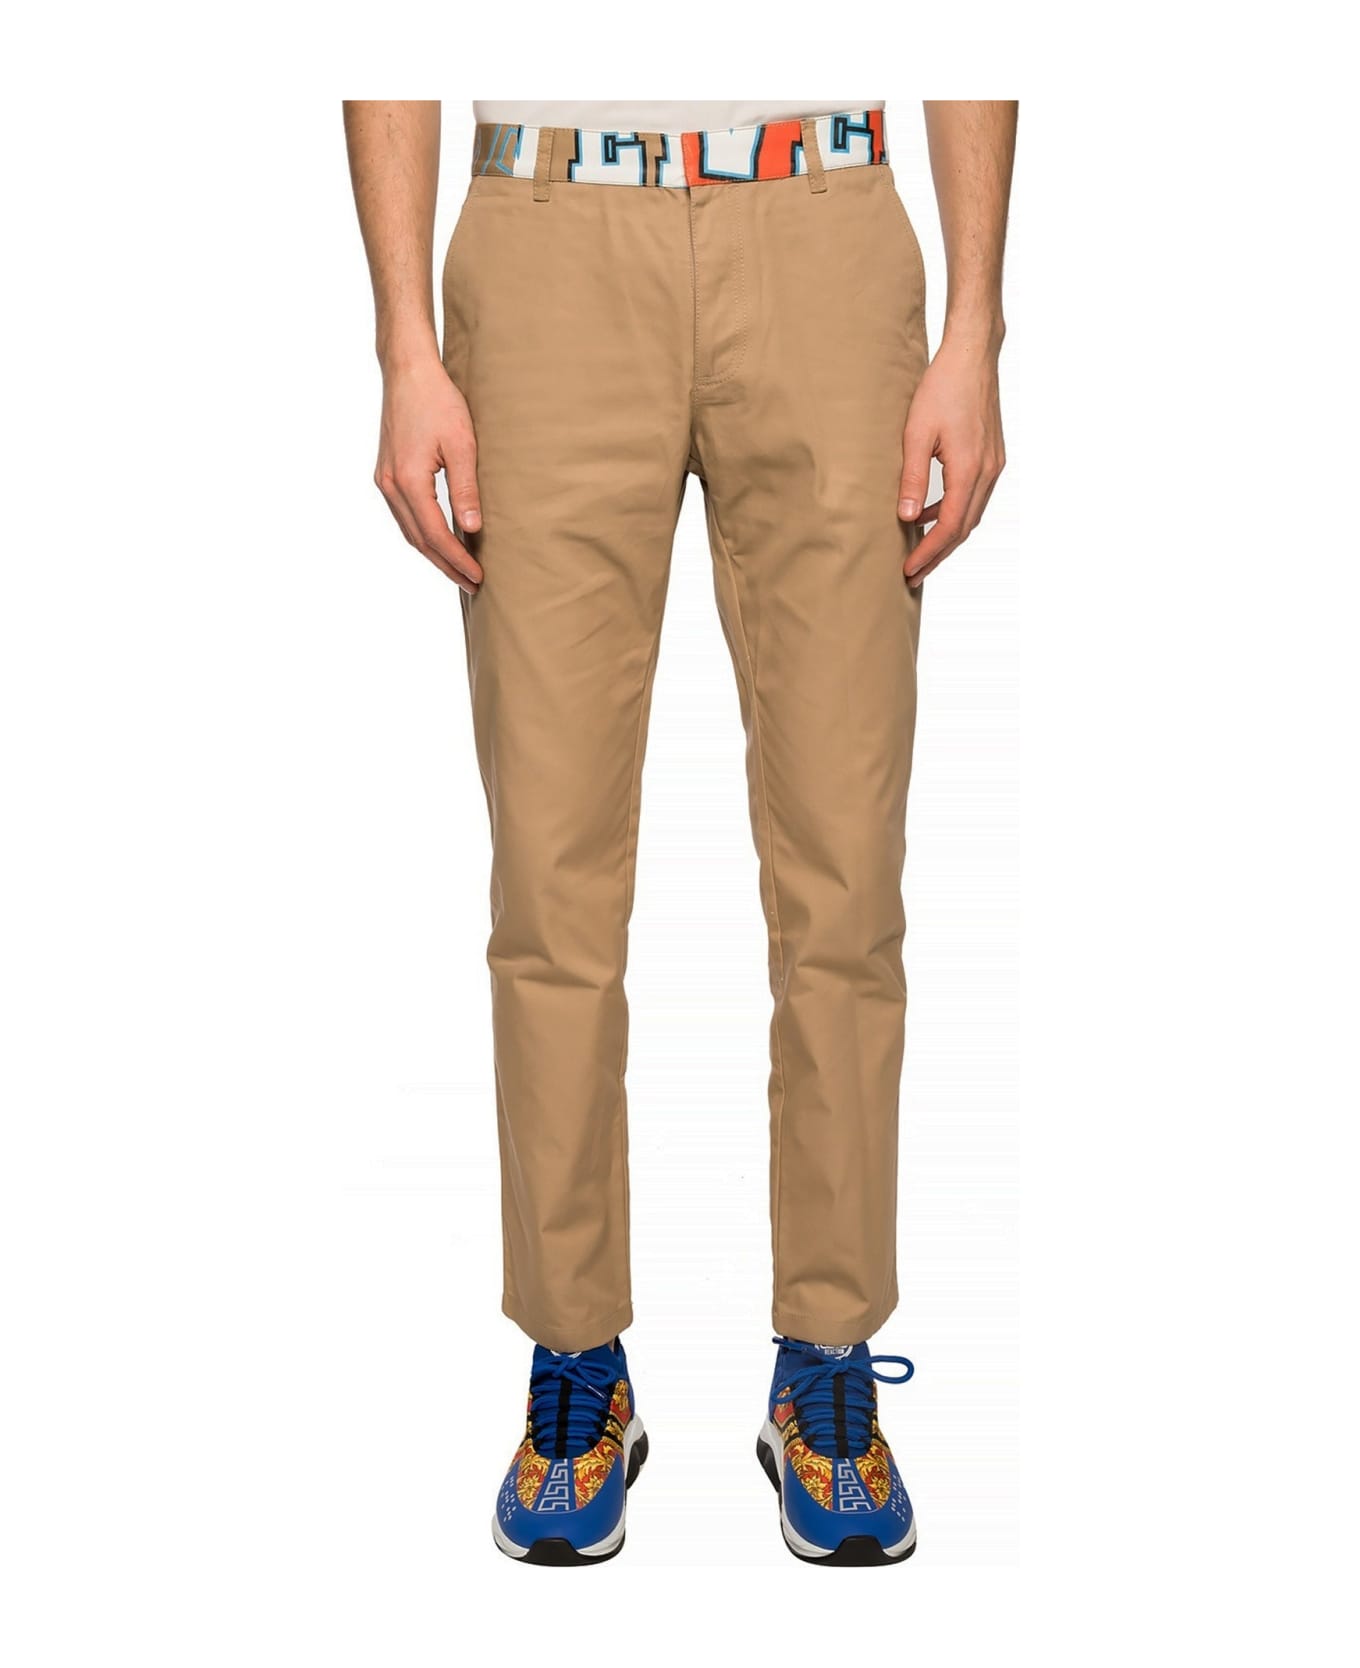 Versace Compilation Chino Trousers - Beige ボトムス